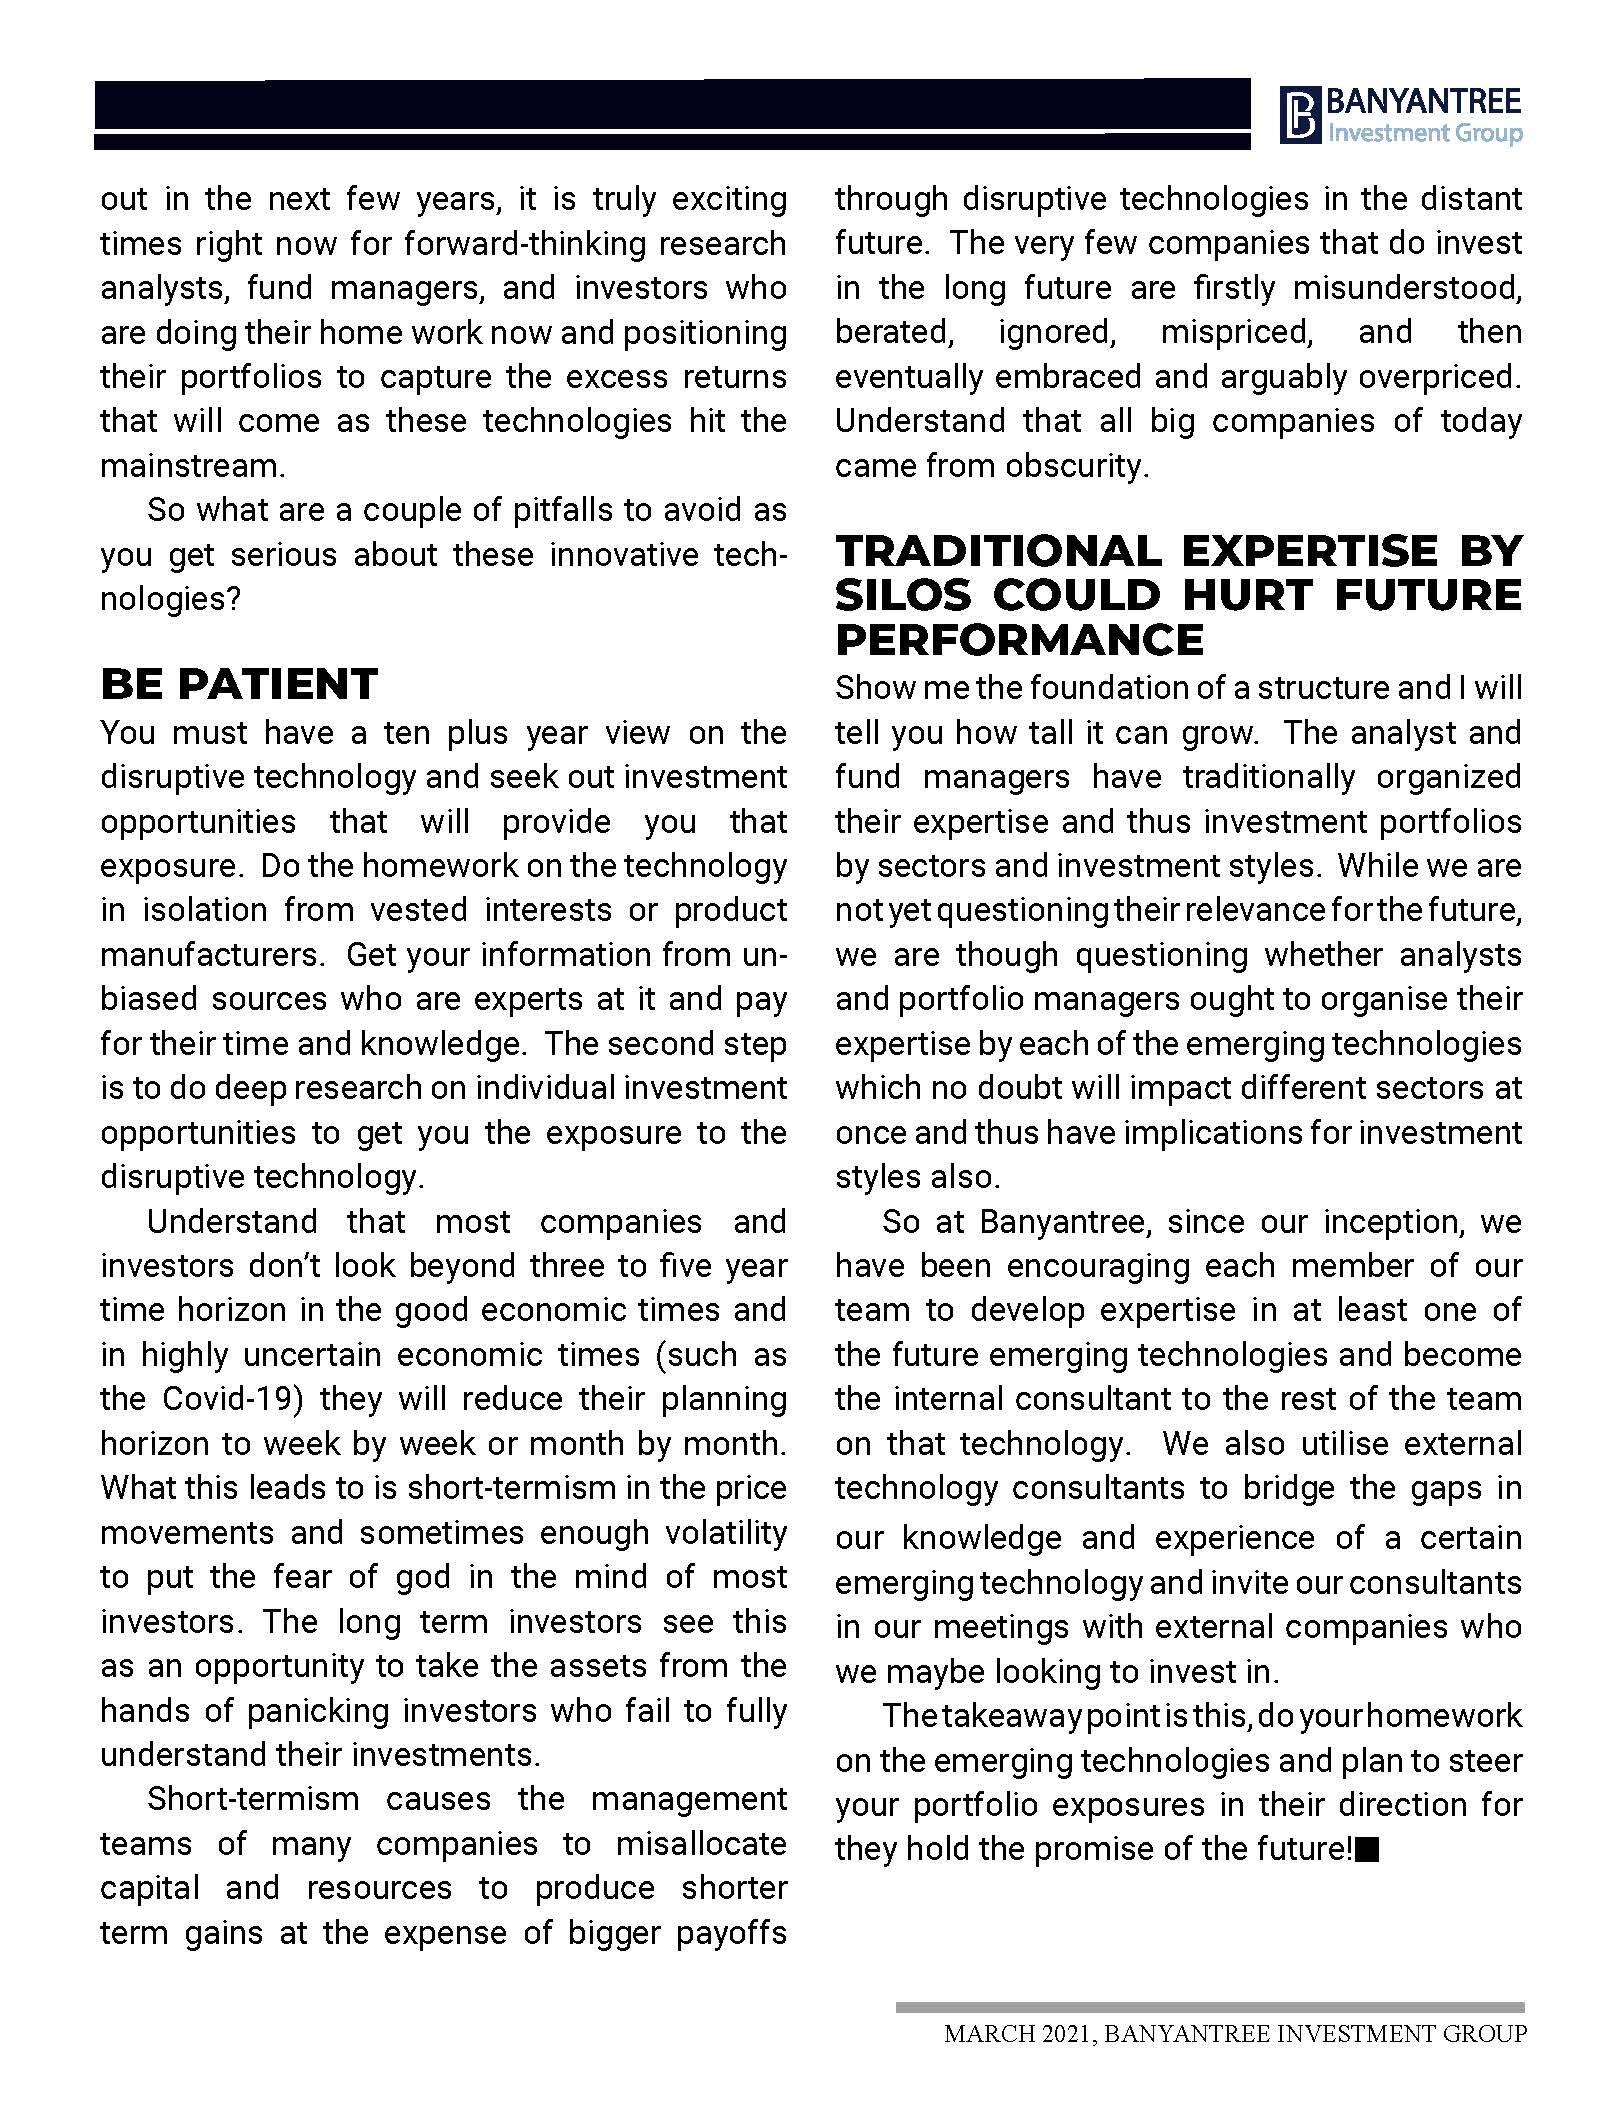 Article- investing in disruptive innovations_Page_3.jpg